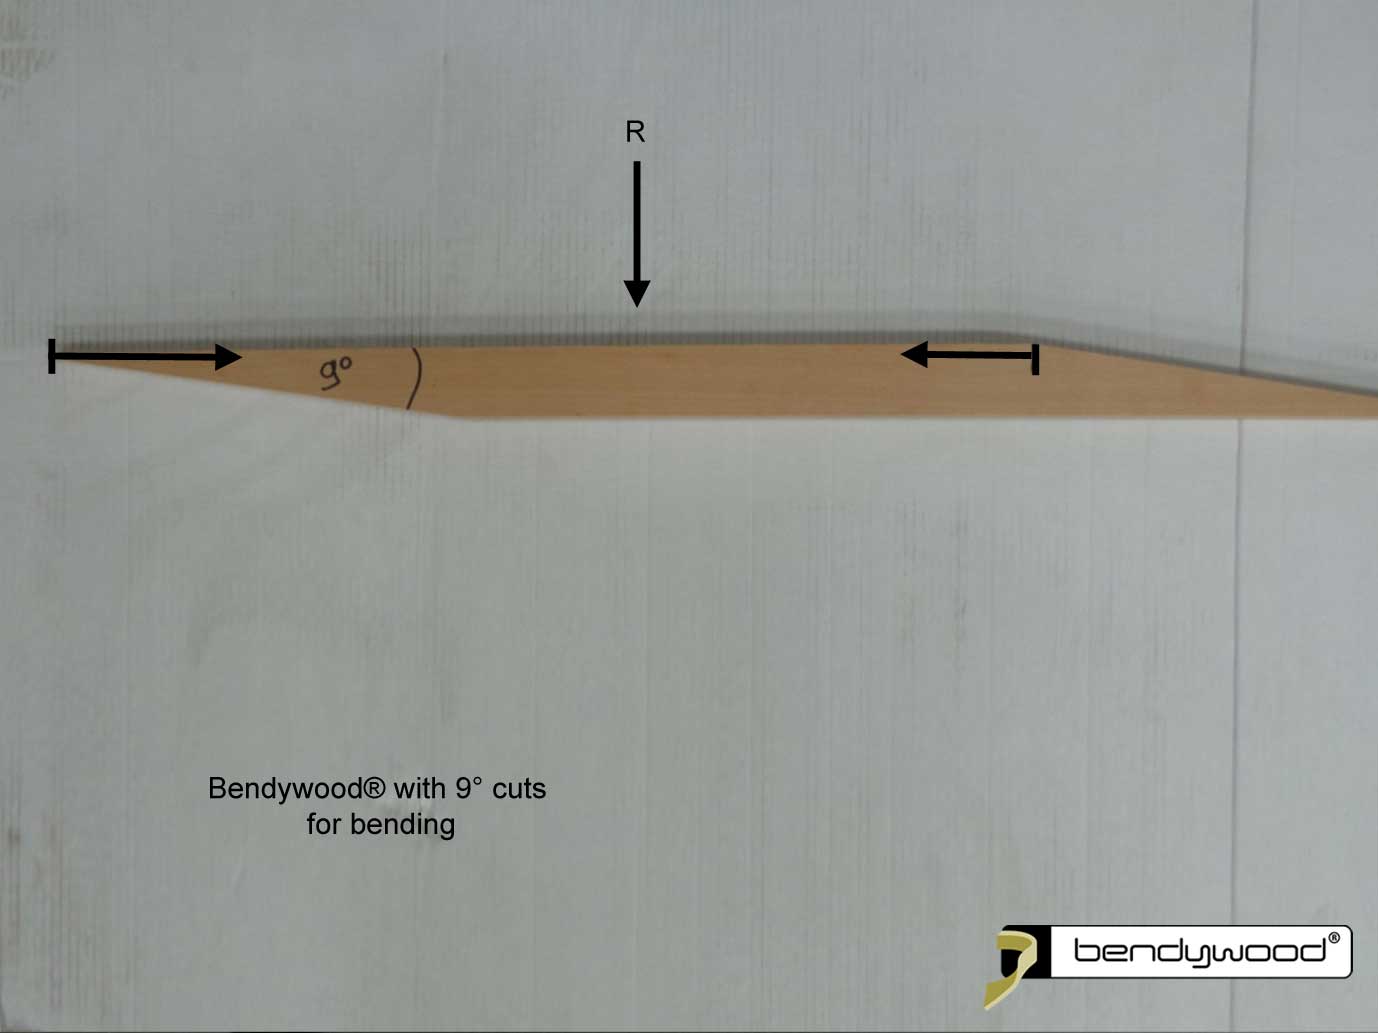 Bendywood® bending handrail with 9° cuts